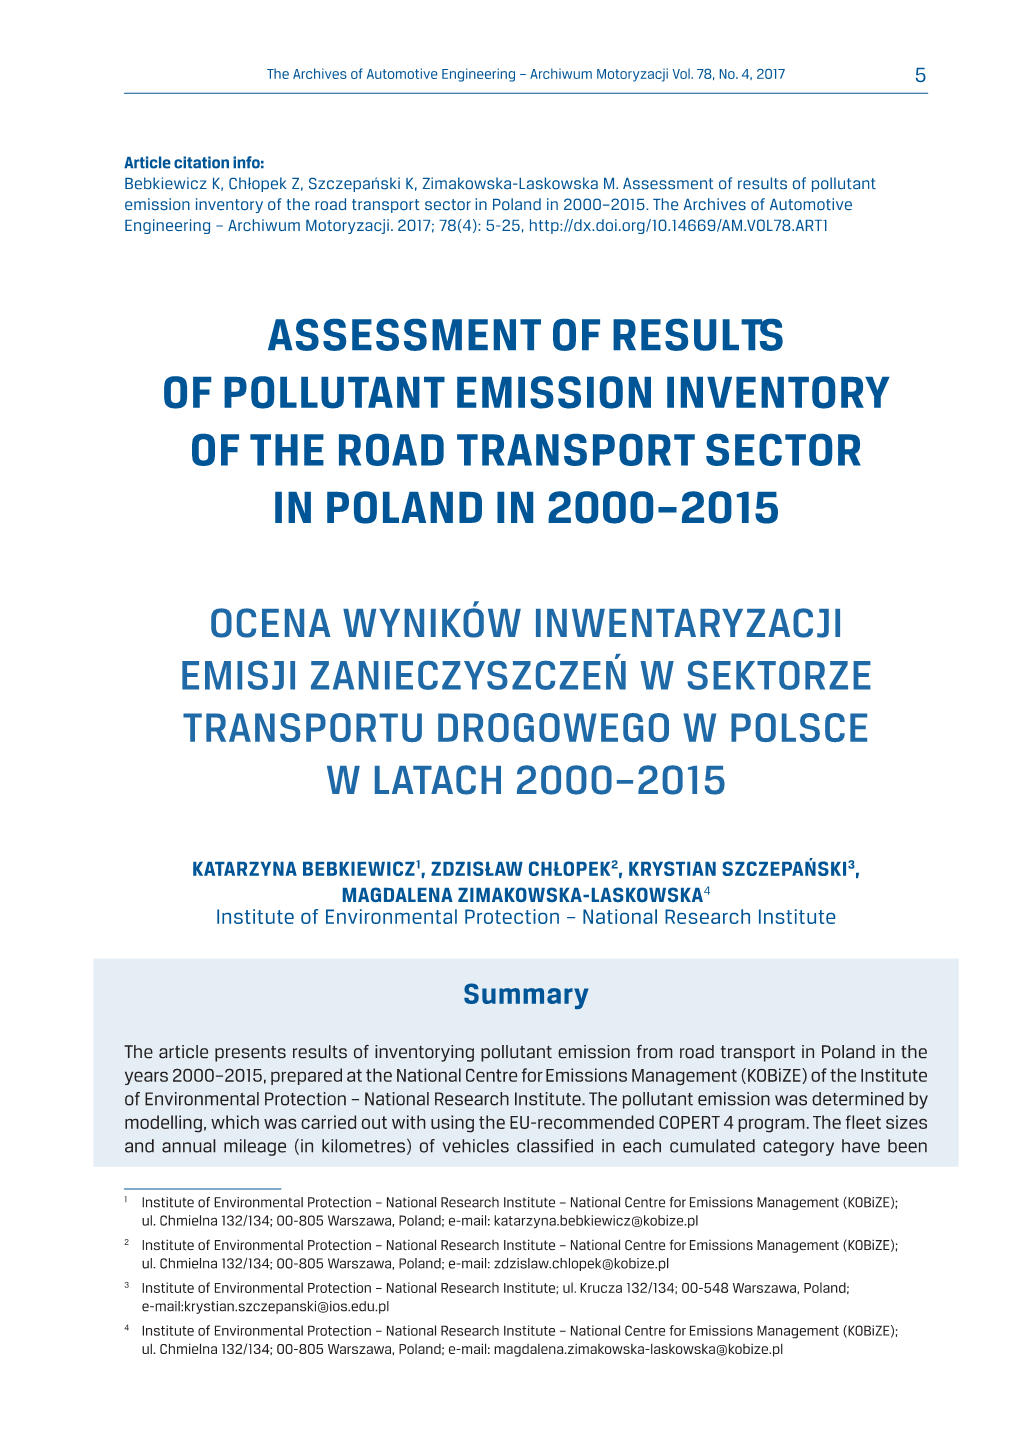 Assessment of Results of Pollutant Emission Inventory of the Road Transport Sector in Poland in 2000–2015